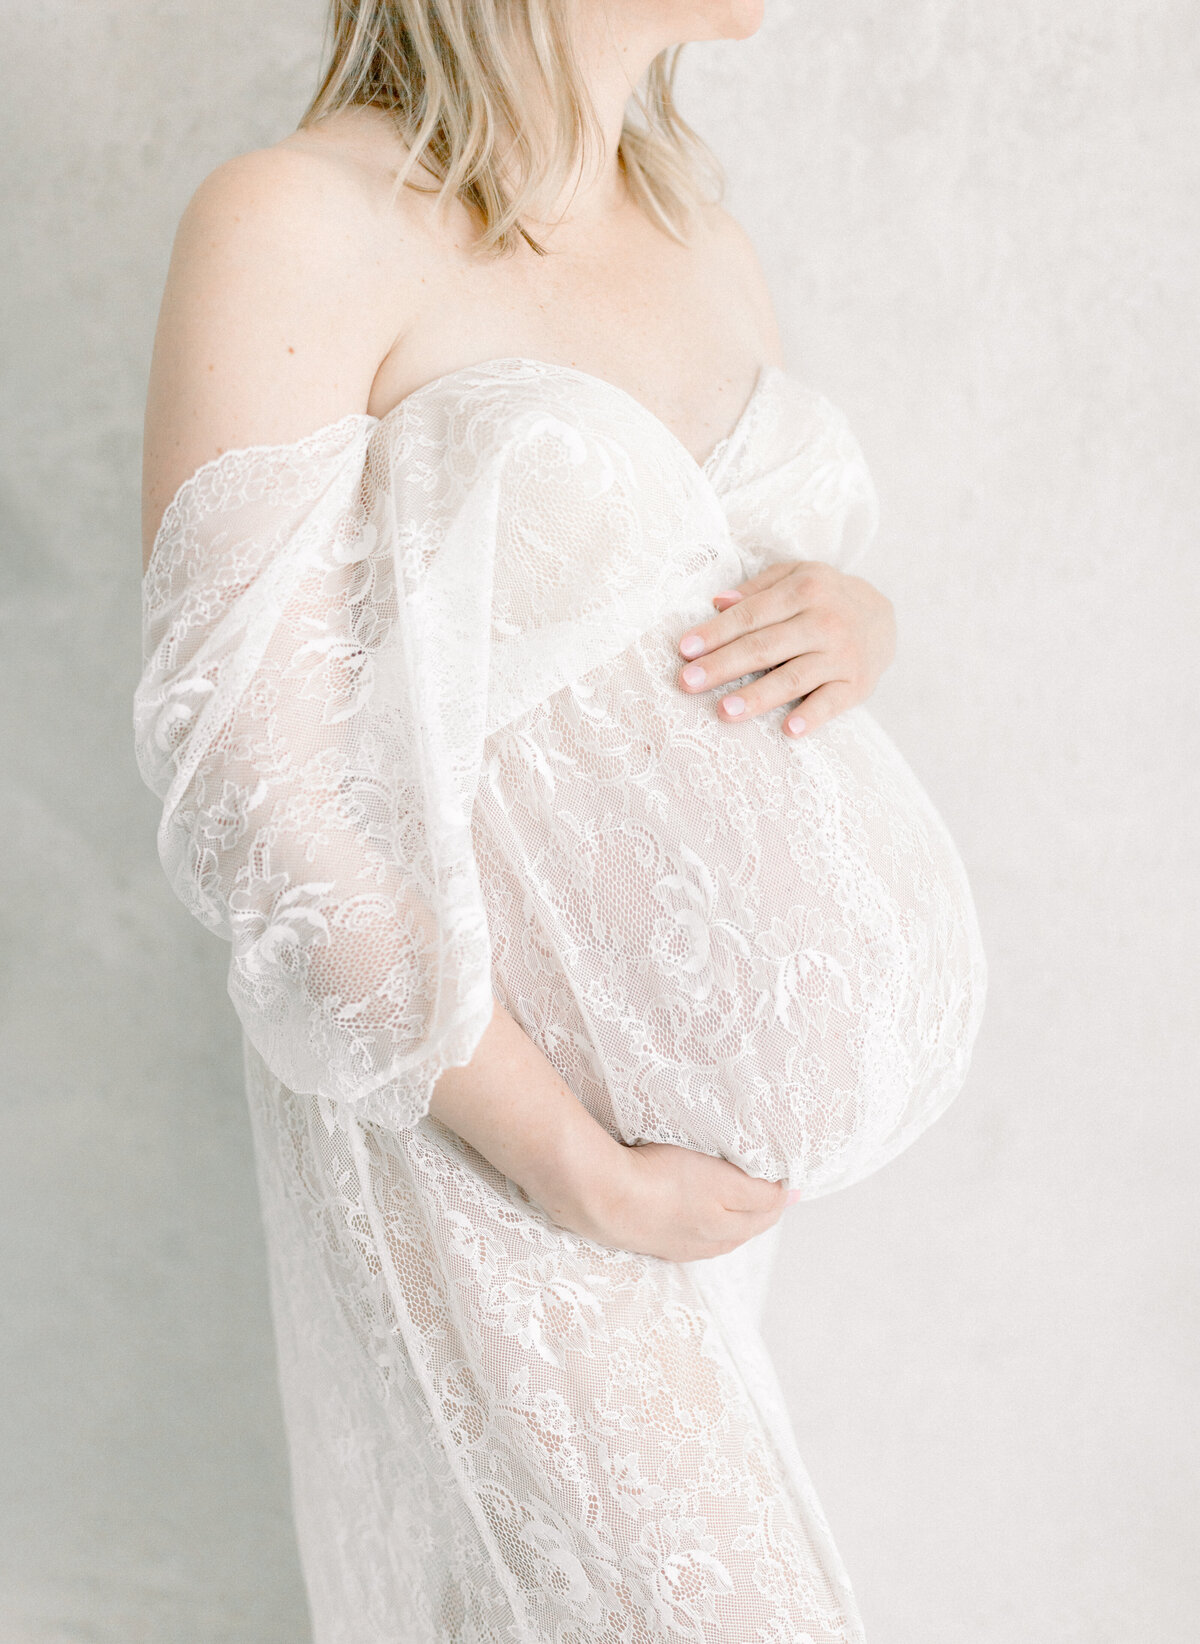 Portrait of an expecting mother in a lace dress